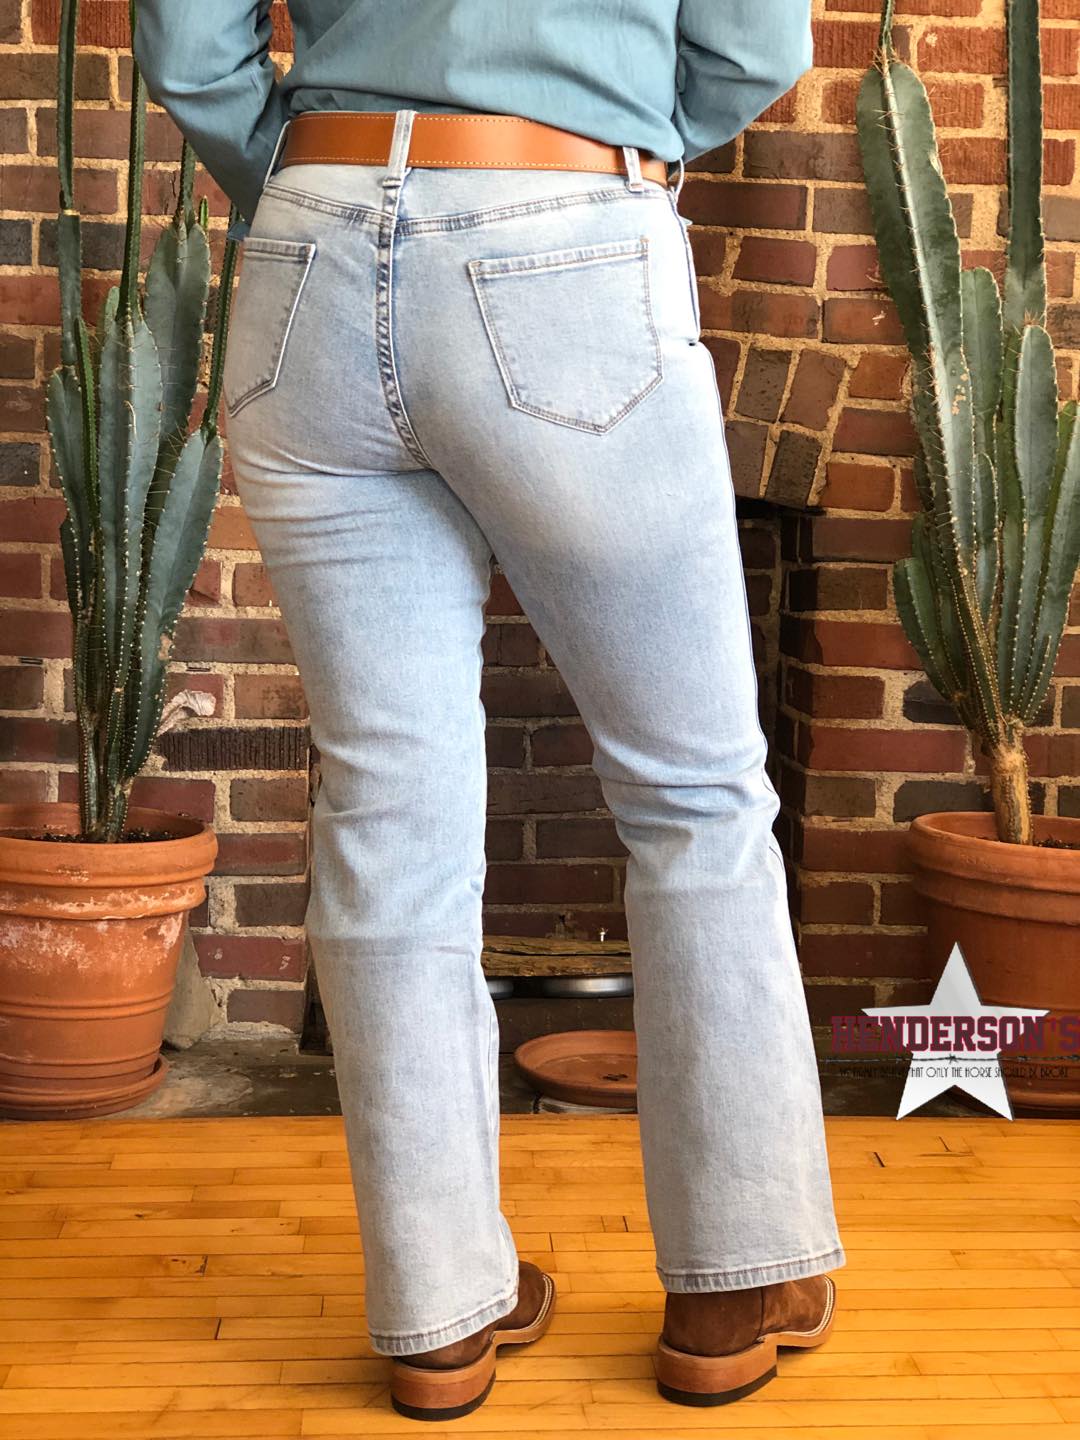 Junior High Rise Jeans by Rock & Roll ~ Powder Blue